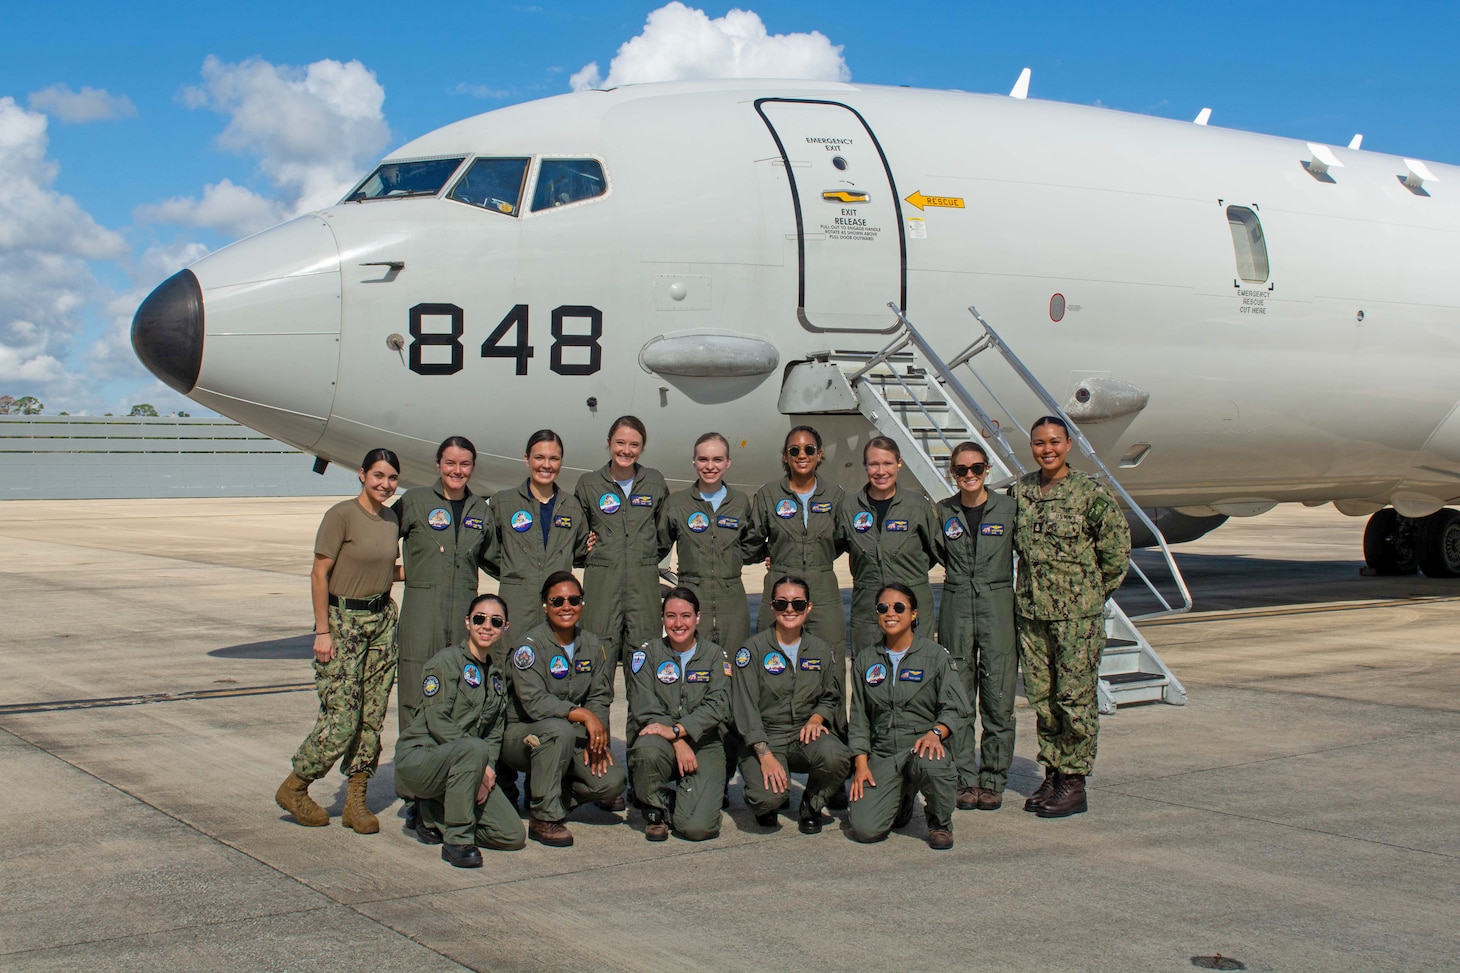 Patrol Squadron (VP) 45 conducted its first all-female flight aboard a P-8A Poseidon aircraft out of Jacksonville, Florida, Sept. 21. A total of 12 aircrew consisting of eight officers and four enlisted Sailors participated in a training flight to train the future of naval aviation. An additional five female ground crew served various maintenance roles to ensure the aircraft met all requirements and was safe for flight.